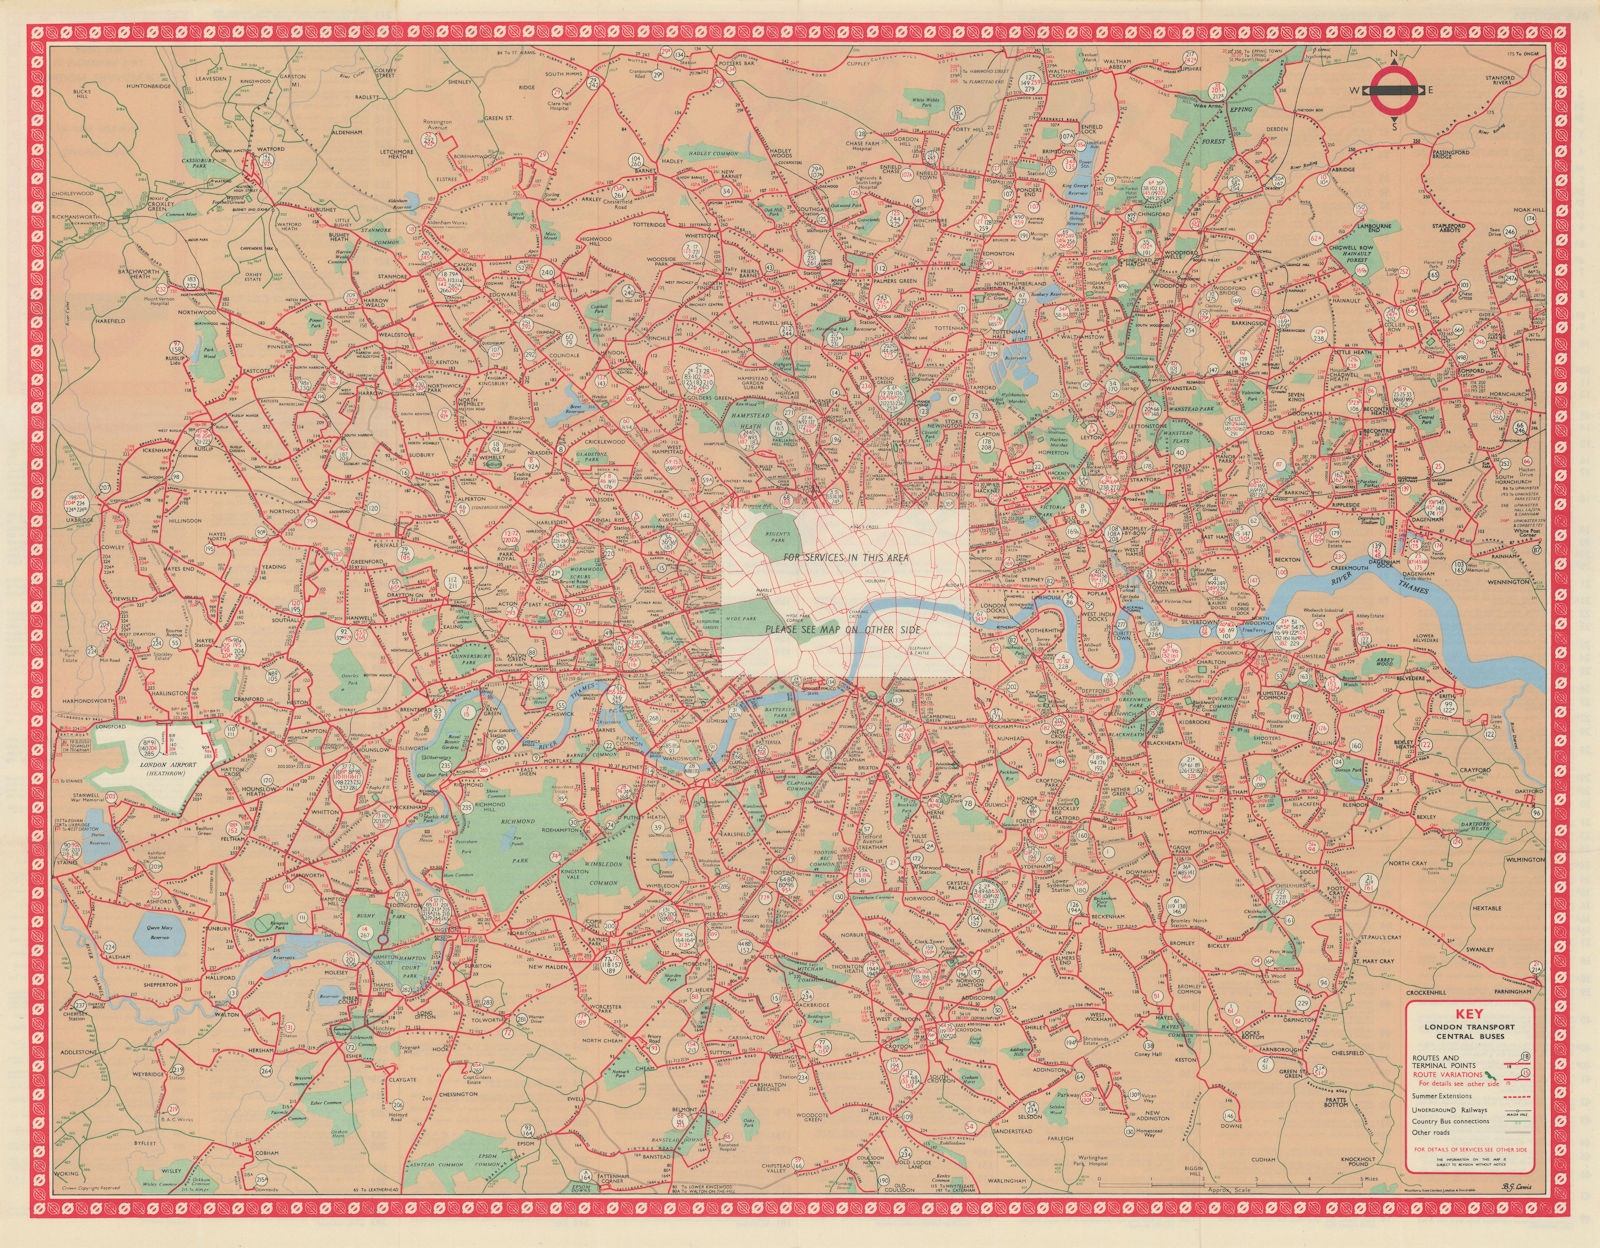 London Transport Central Buses map and list of routes. LEWIS #2 1965 old